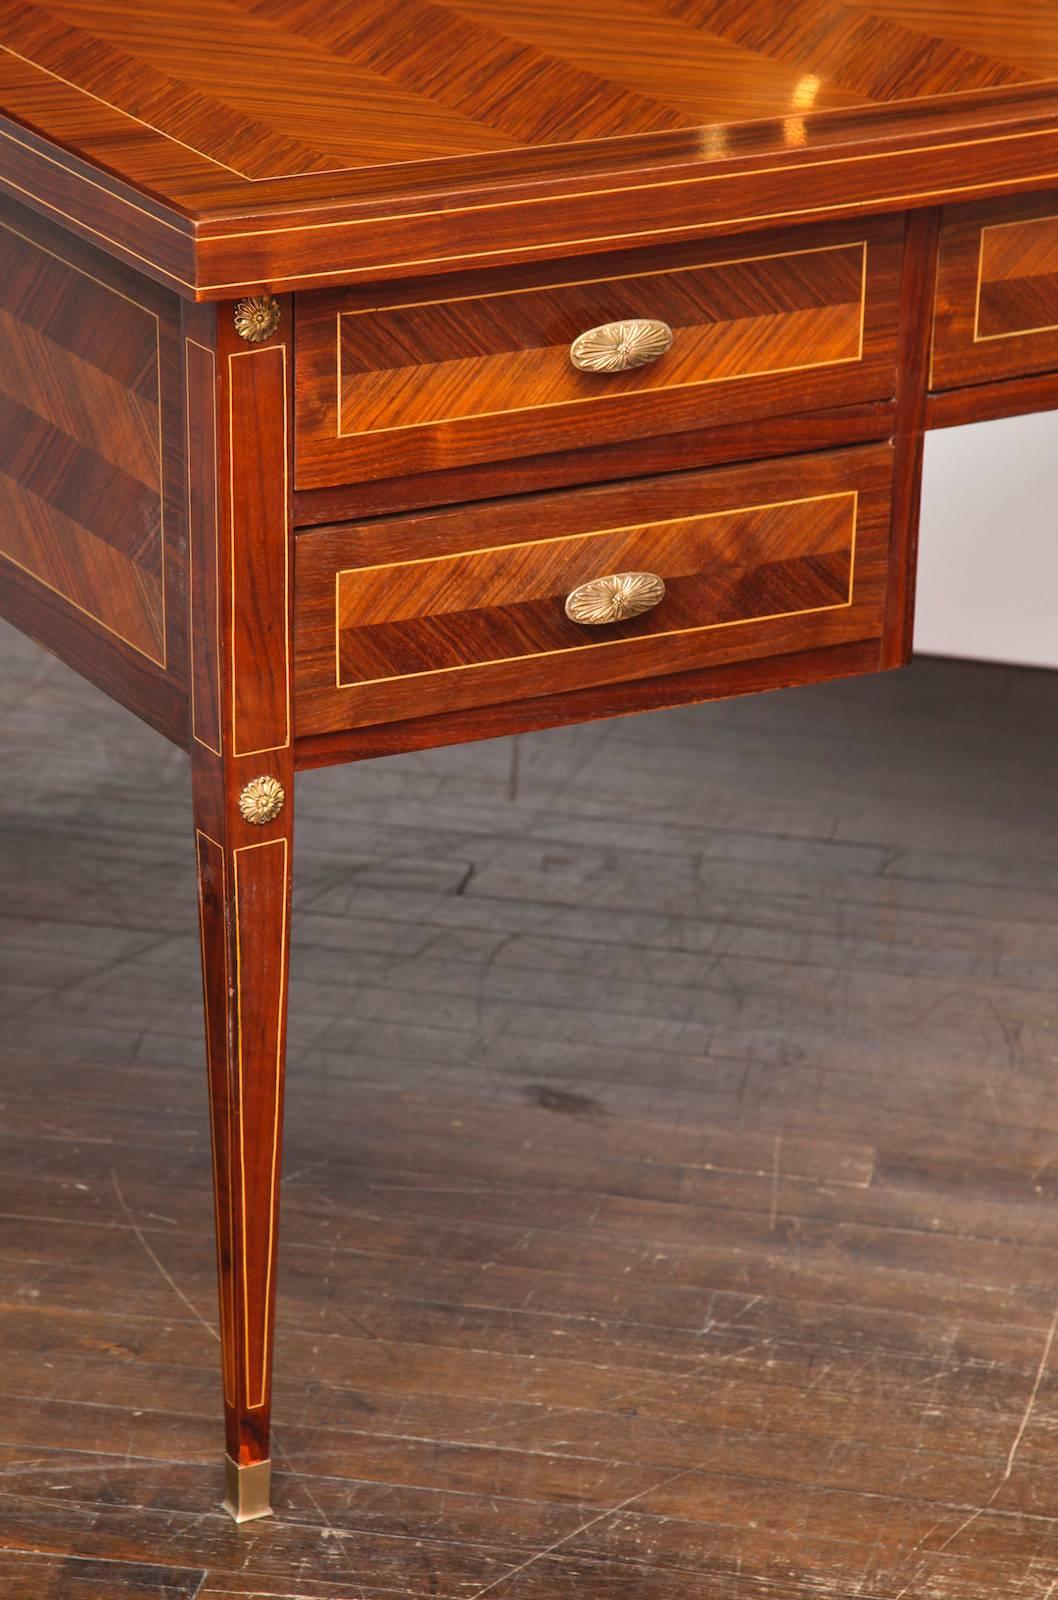 Five-drawer desk by Paolo Buffa. Fantastic desk of figured rosewood veneer, bookmatched in a chevron pattern with light wood inlay trim details. Five drawers with cast brass pull handles and brass sabotz. An extraordinary example of the cabinetry